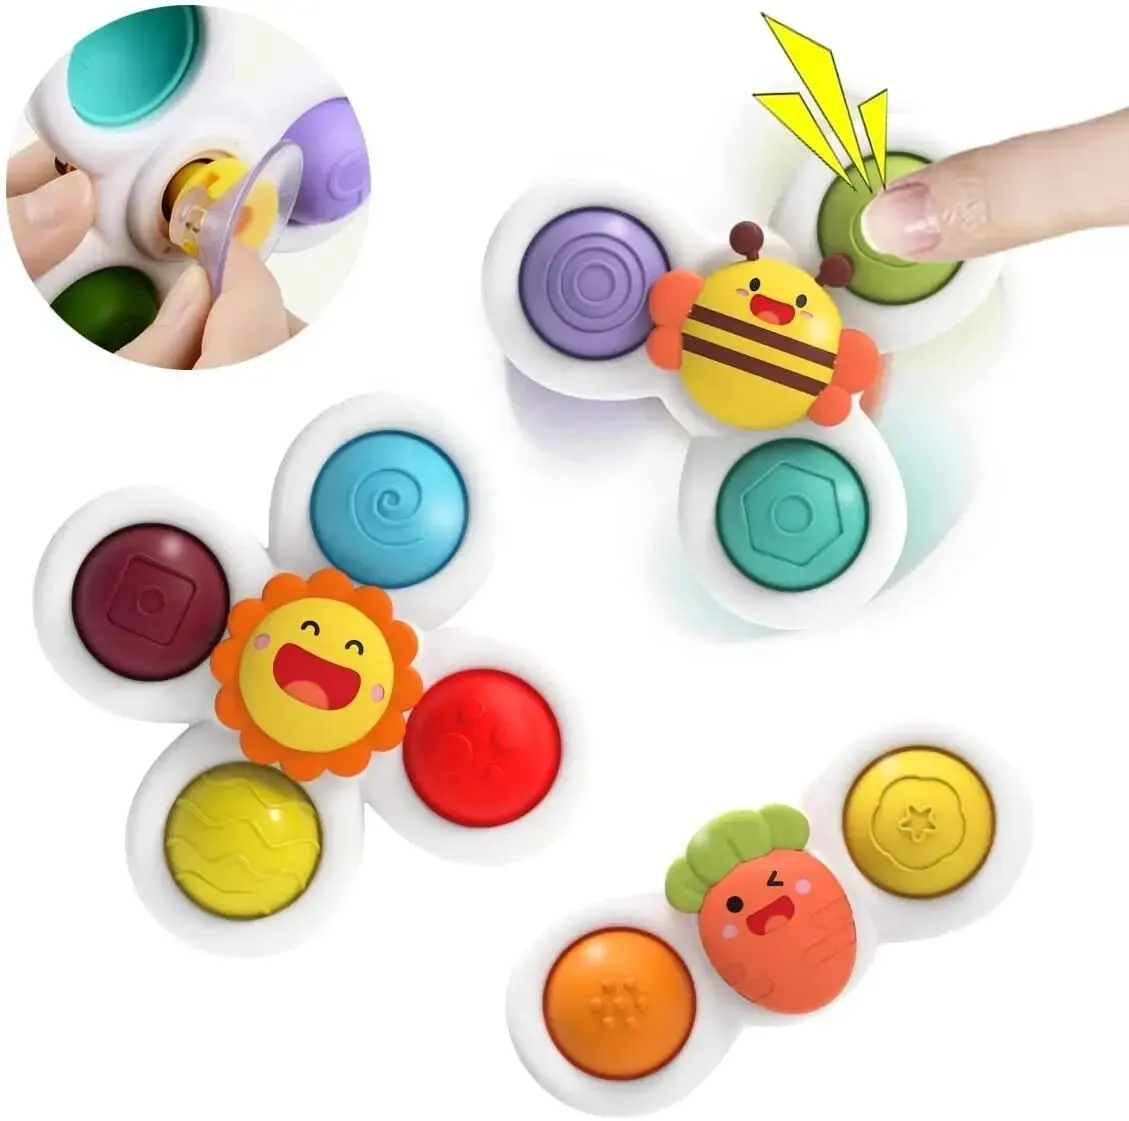 V-Can Kids Baby Suction Cup Spinner Toys, Strong Suction Cup Bath Toys, Suction Cup Spinning Dimple Fidget Spinners